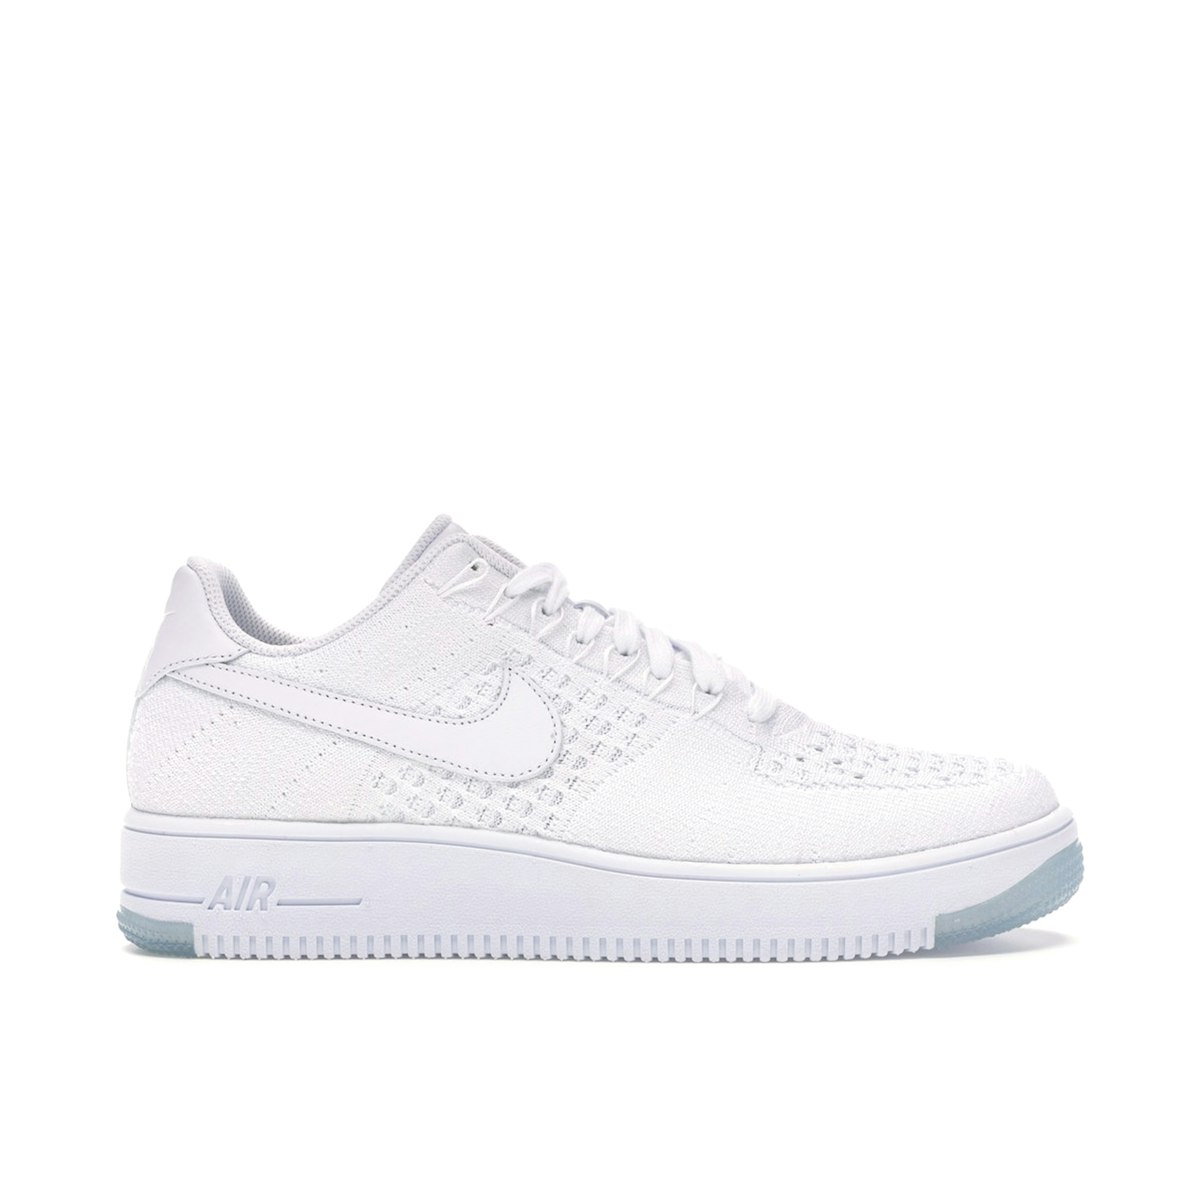 Air Force 1 Ultra Flyknit Low 'White Ice' - Nike - 817419 100 -  white/white-ice